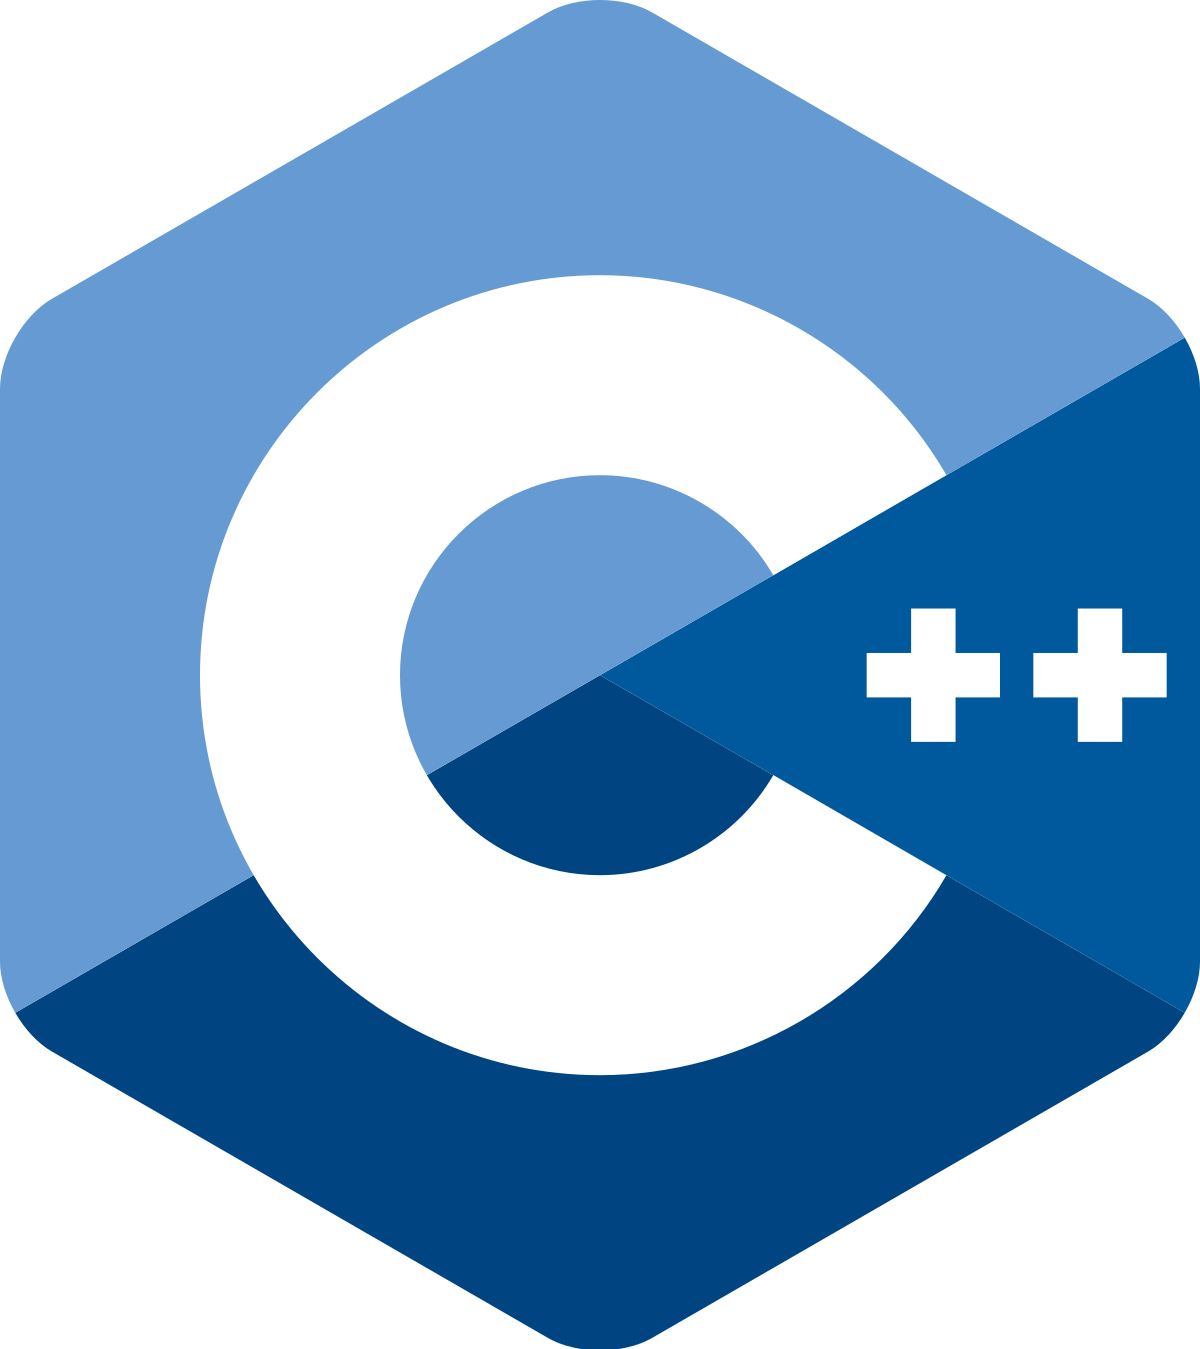 code examples and answer to questions in C++ programming luaguage